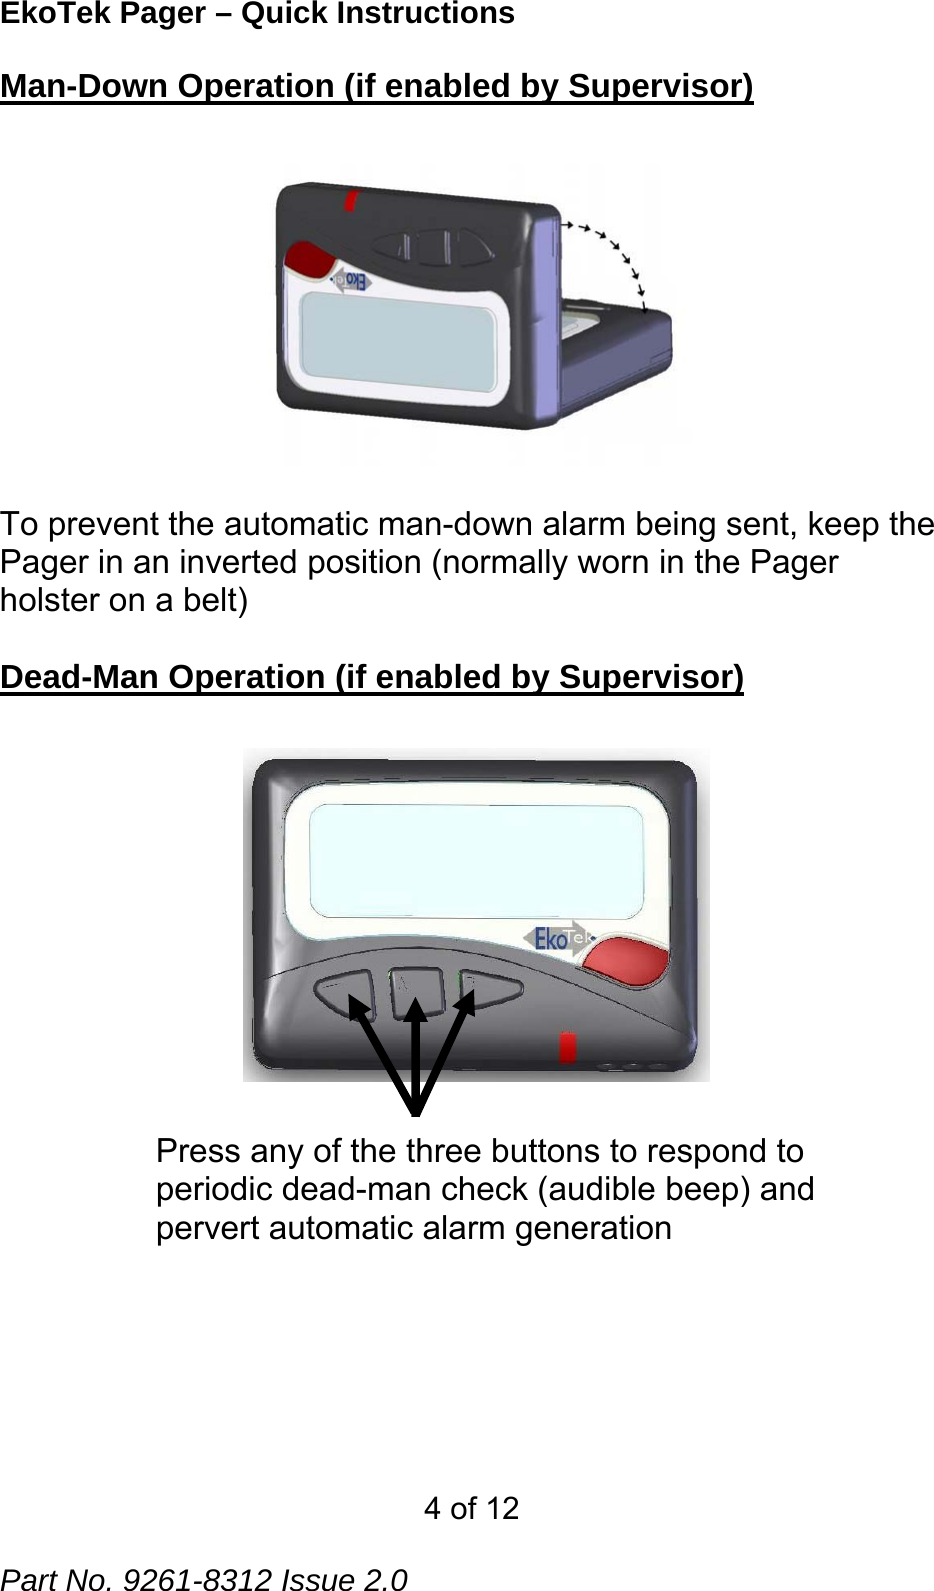 EkoTek Pager – Quick Instructions Man-Down Operation (if enabled by Supervisor)   To prevent the automatic man-down alarm being sent, keep the Pager in an inverted position (normally worn in the Pager holster on a belt)  Dead-Man Operation (if enabled by Supervisor) Press any of the three buttons to respond to periodic dead-man check (audible beep) and pervert automatic alarm generation  4 of 12  Part No. 9261-8312 Issue 2.0 